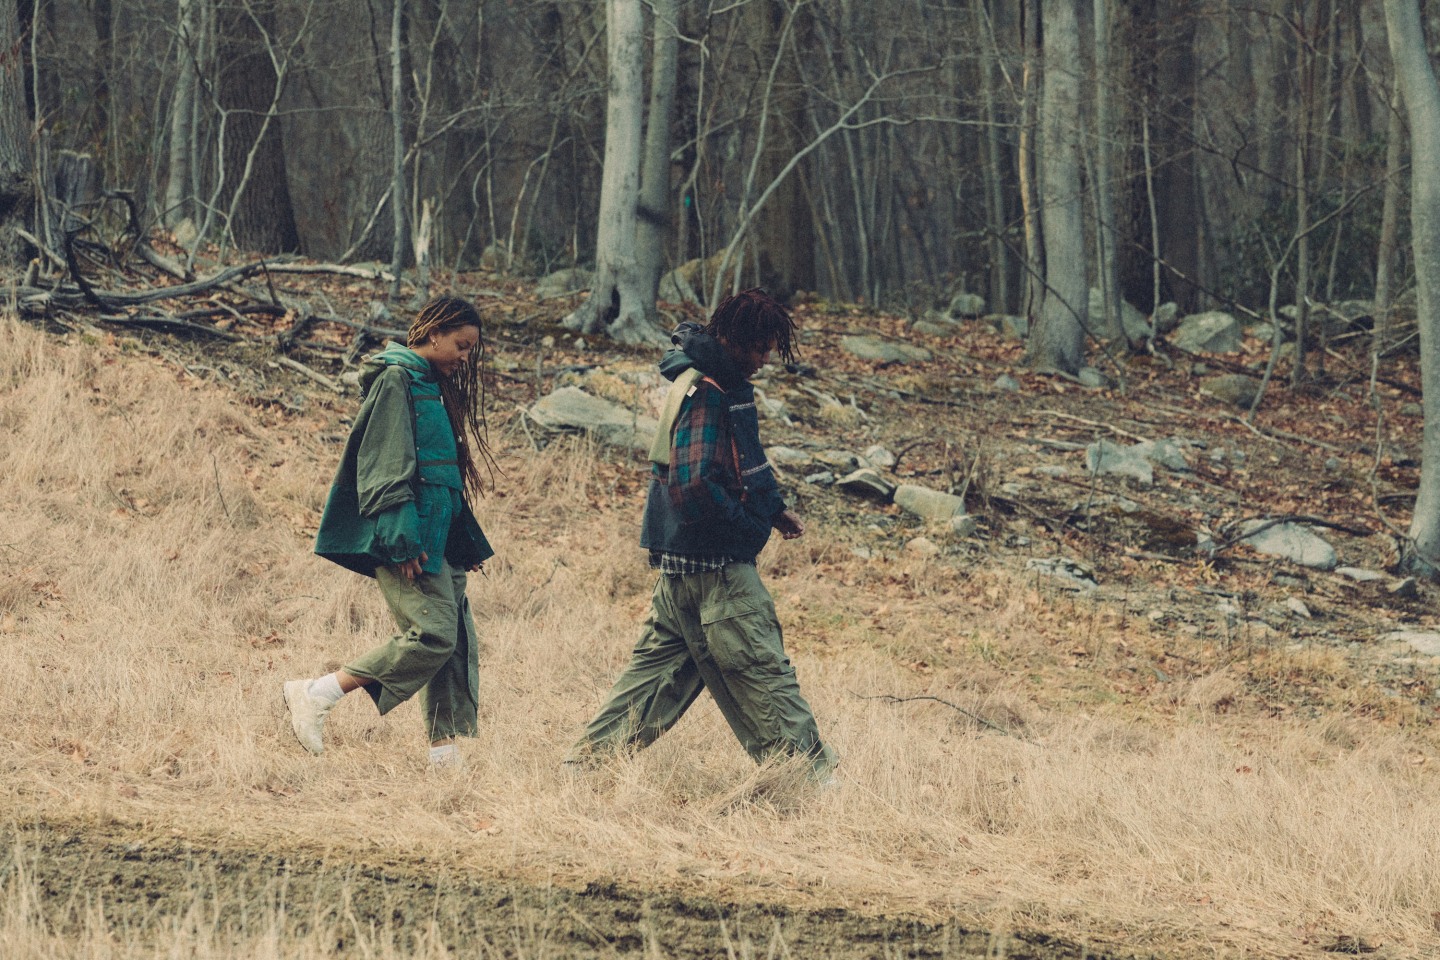 Move with purpose: Functional outerwear that works with you